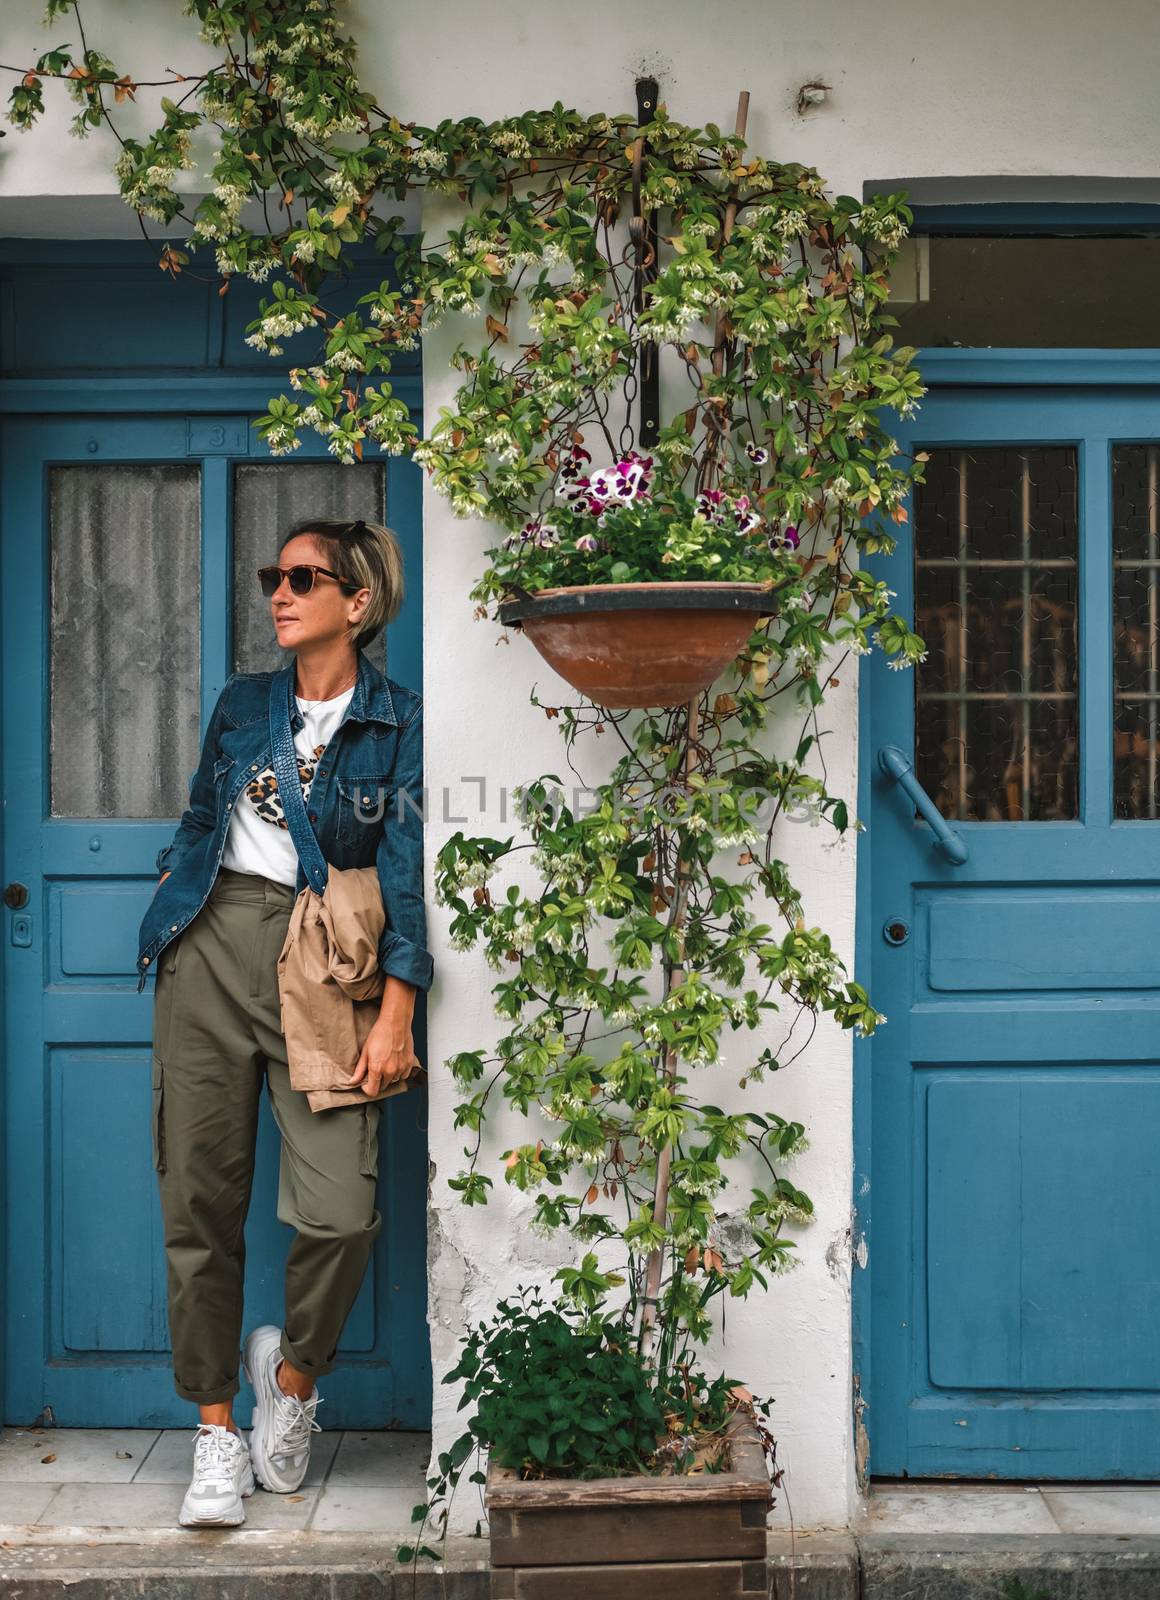 Cool dressed lady in front of turquoise wooden door with flowers around.